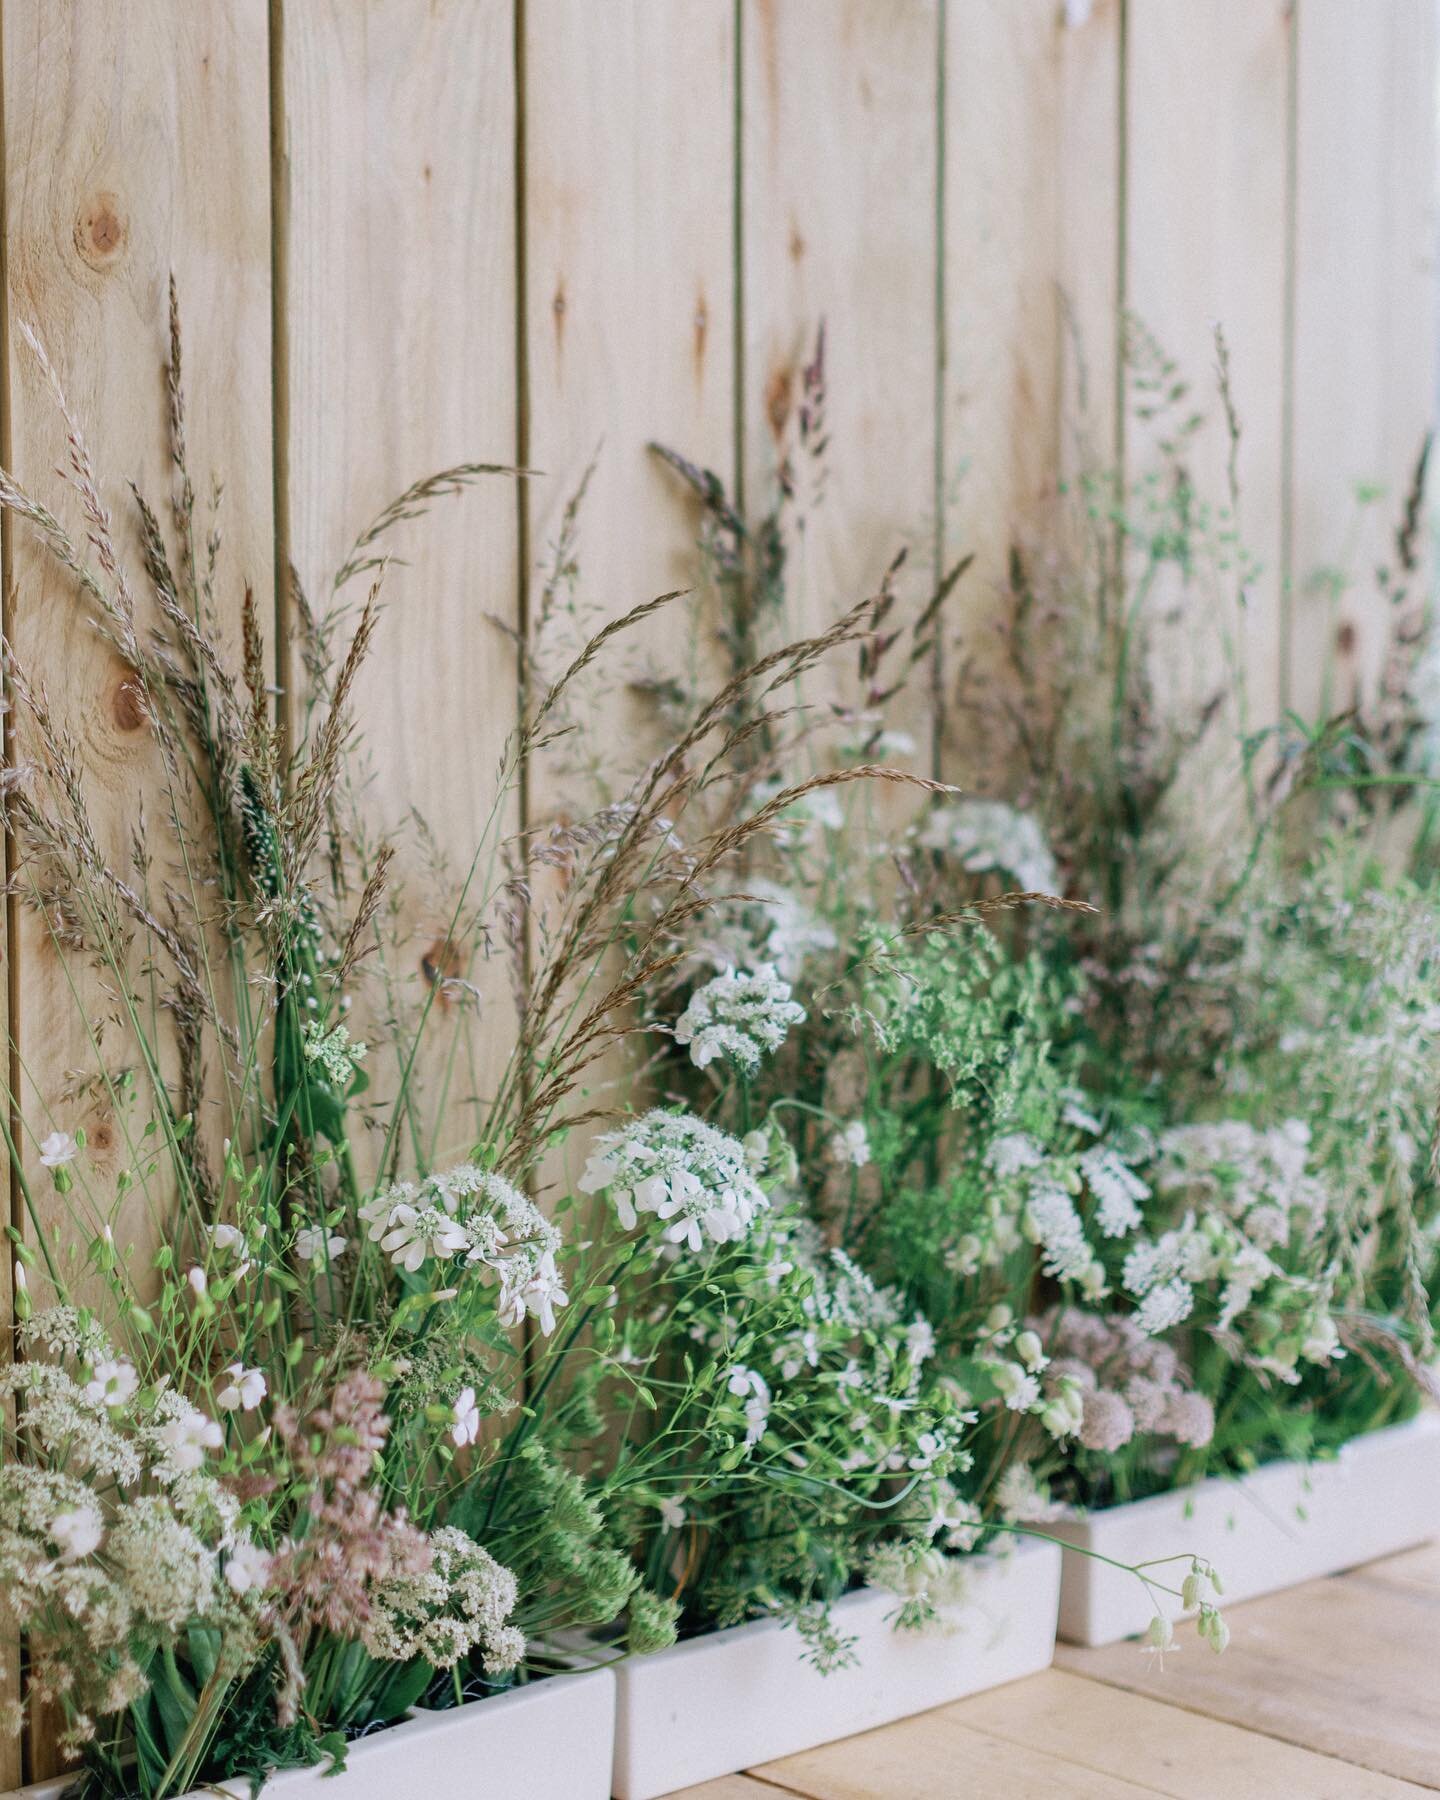 With all this rain the fields and hedgerows are beginning to come alive! These meadow arrangements were inspired by the lush grass verges at this time of year. Filled with wild grasses, cow parsley and ammi. They created a beautiful light and airy ai